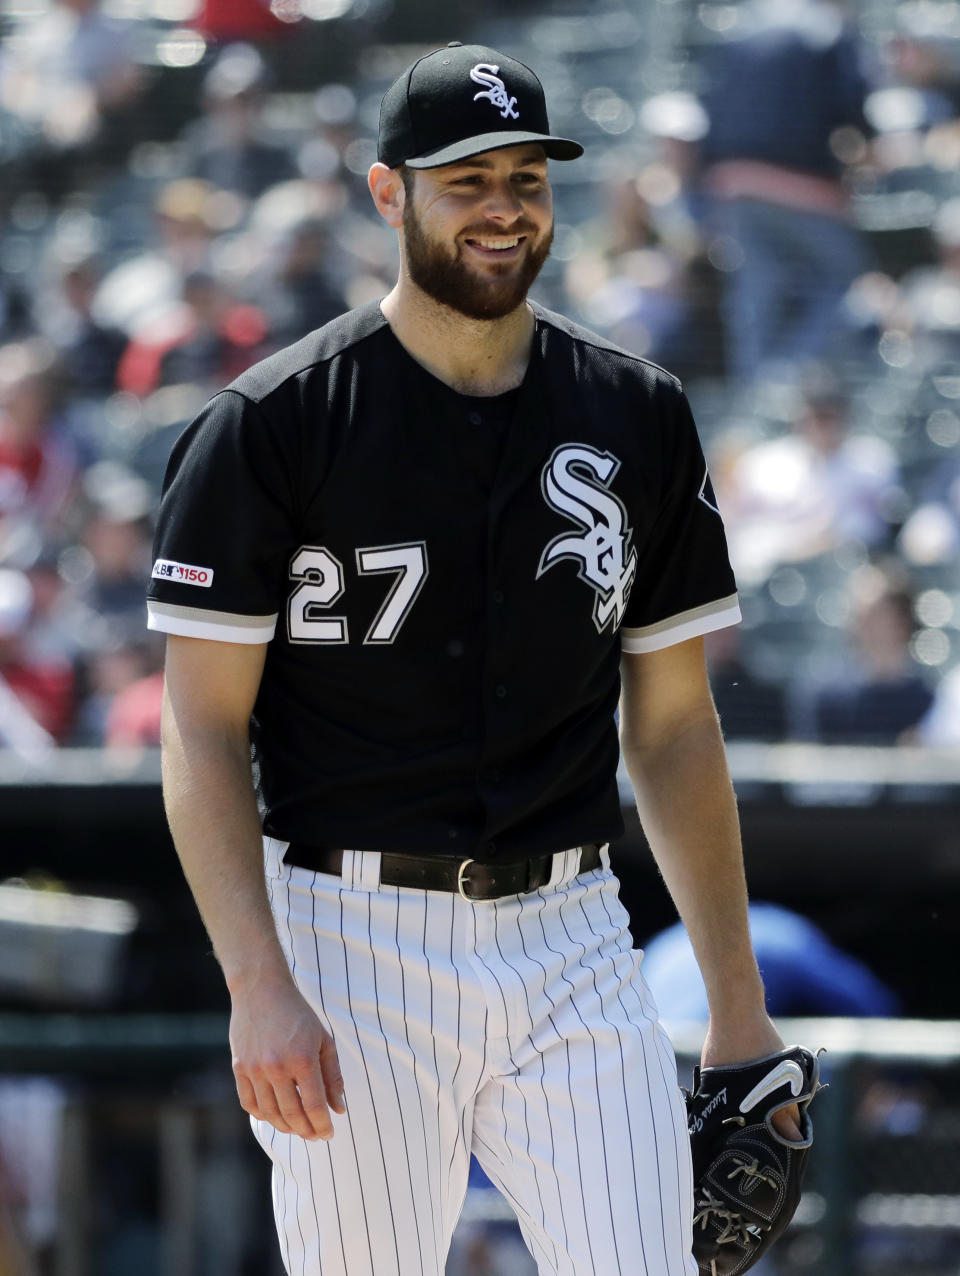 Chicago White Sox starting pitcher Lucas Giolito smiles as he walks back to the dugout during the first inning of a baseball game against the Kansas City Royals, in Chicago, Wednesday, April 17, 2019. (AP Photo/Nam Y. Huh)